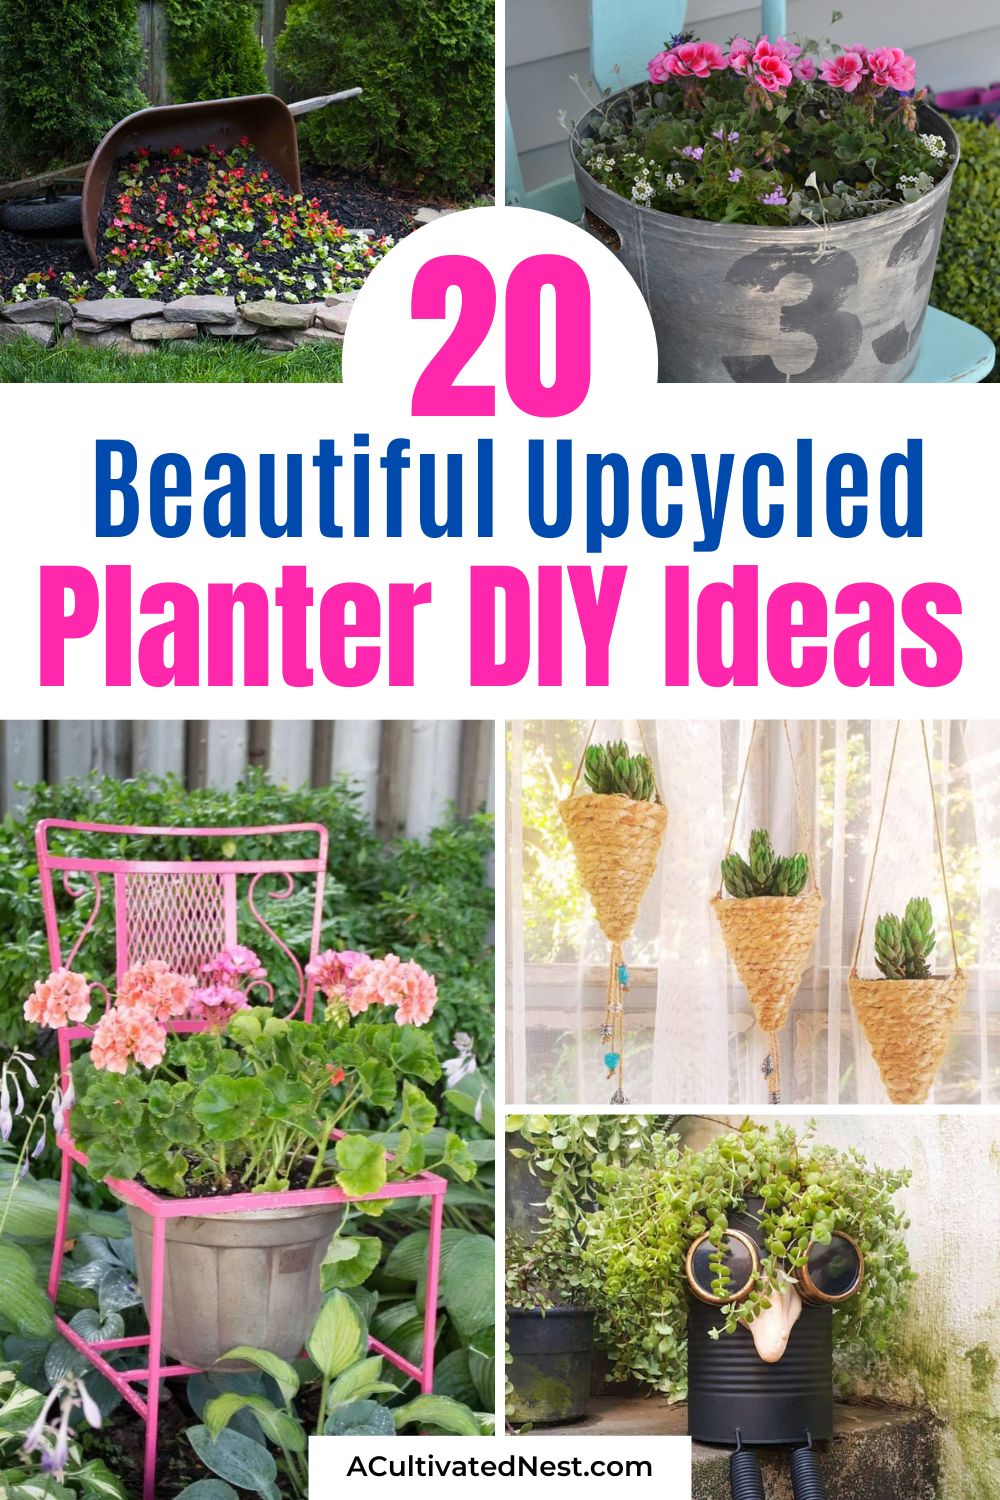 20 Beautiful Upcycled Planter Ideas- Get inspired to go green with these upcycled planters! Explore unique DIY upcycled planter projects that repurpose everyday items into beautiful homes for your plants. It's eco-friendly and budget-friendly gardening at its finest! | #Upcycling #DIY #Gardening #gardenPlanters #ACultivatedNest